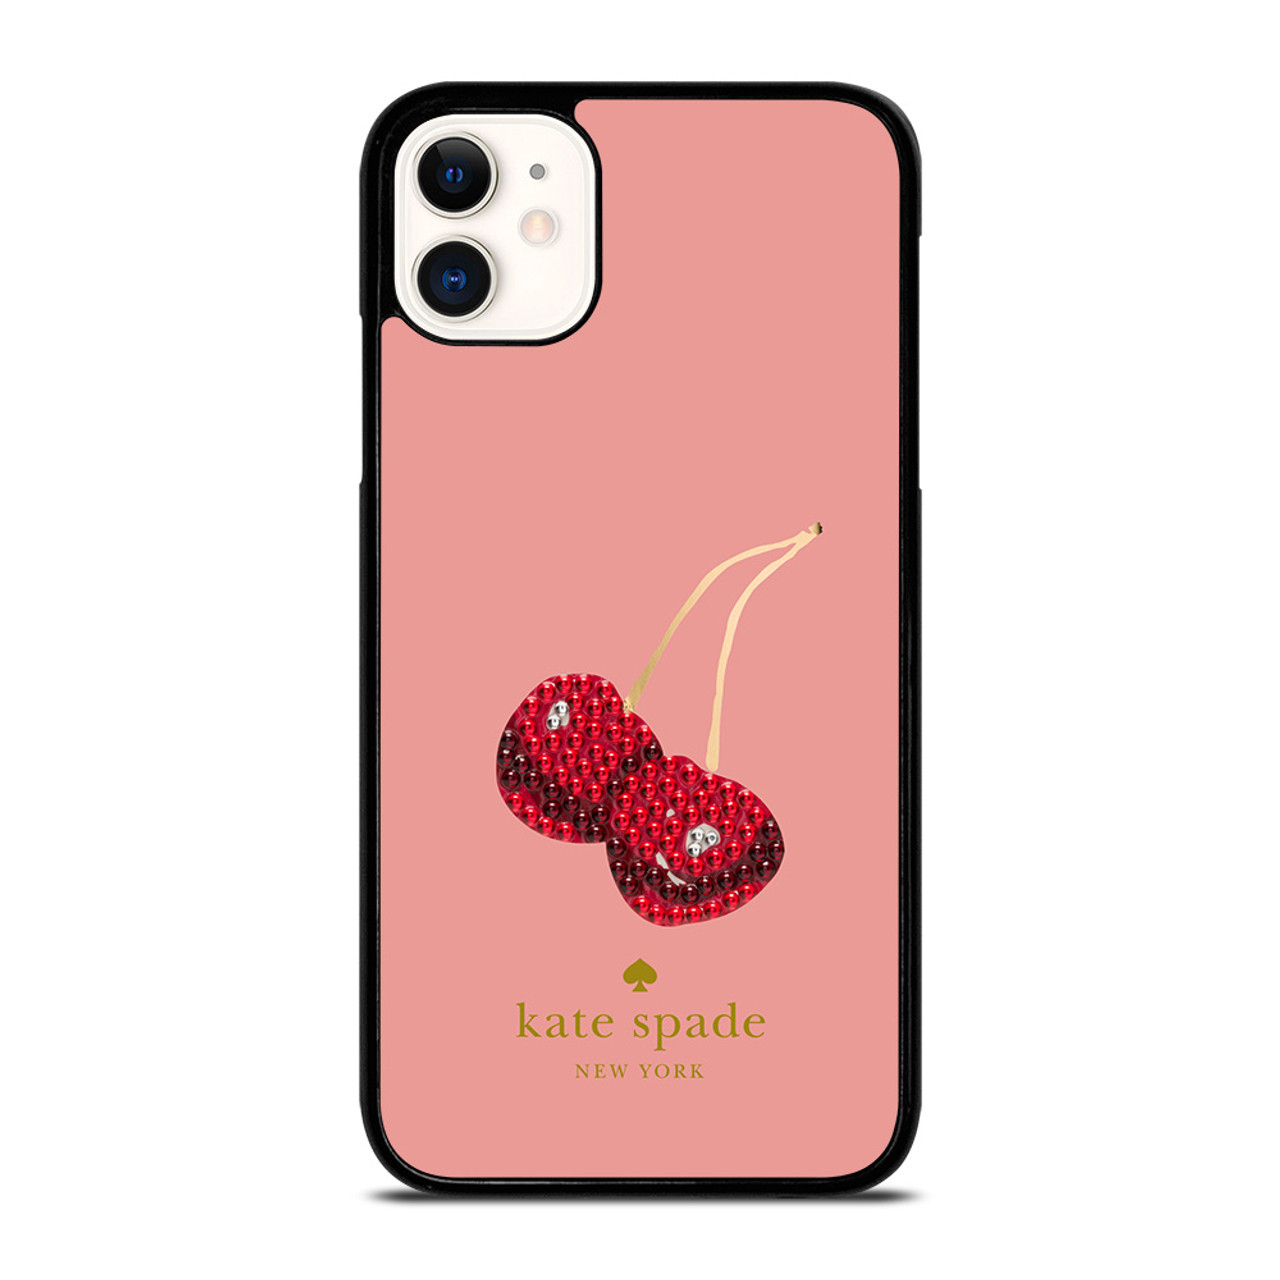 KATE SPADE CHERRY iPhone 11 Case Cover